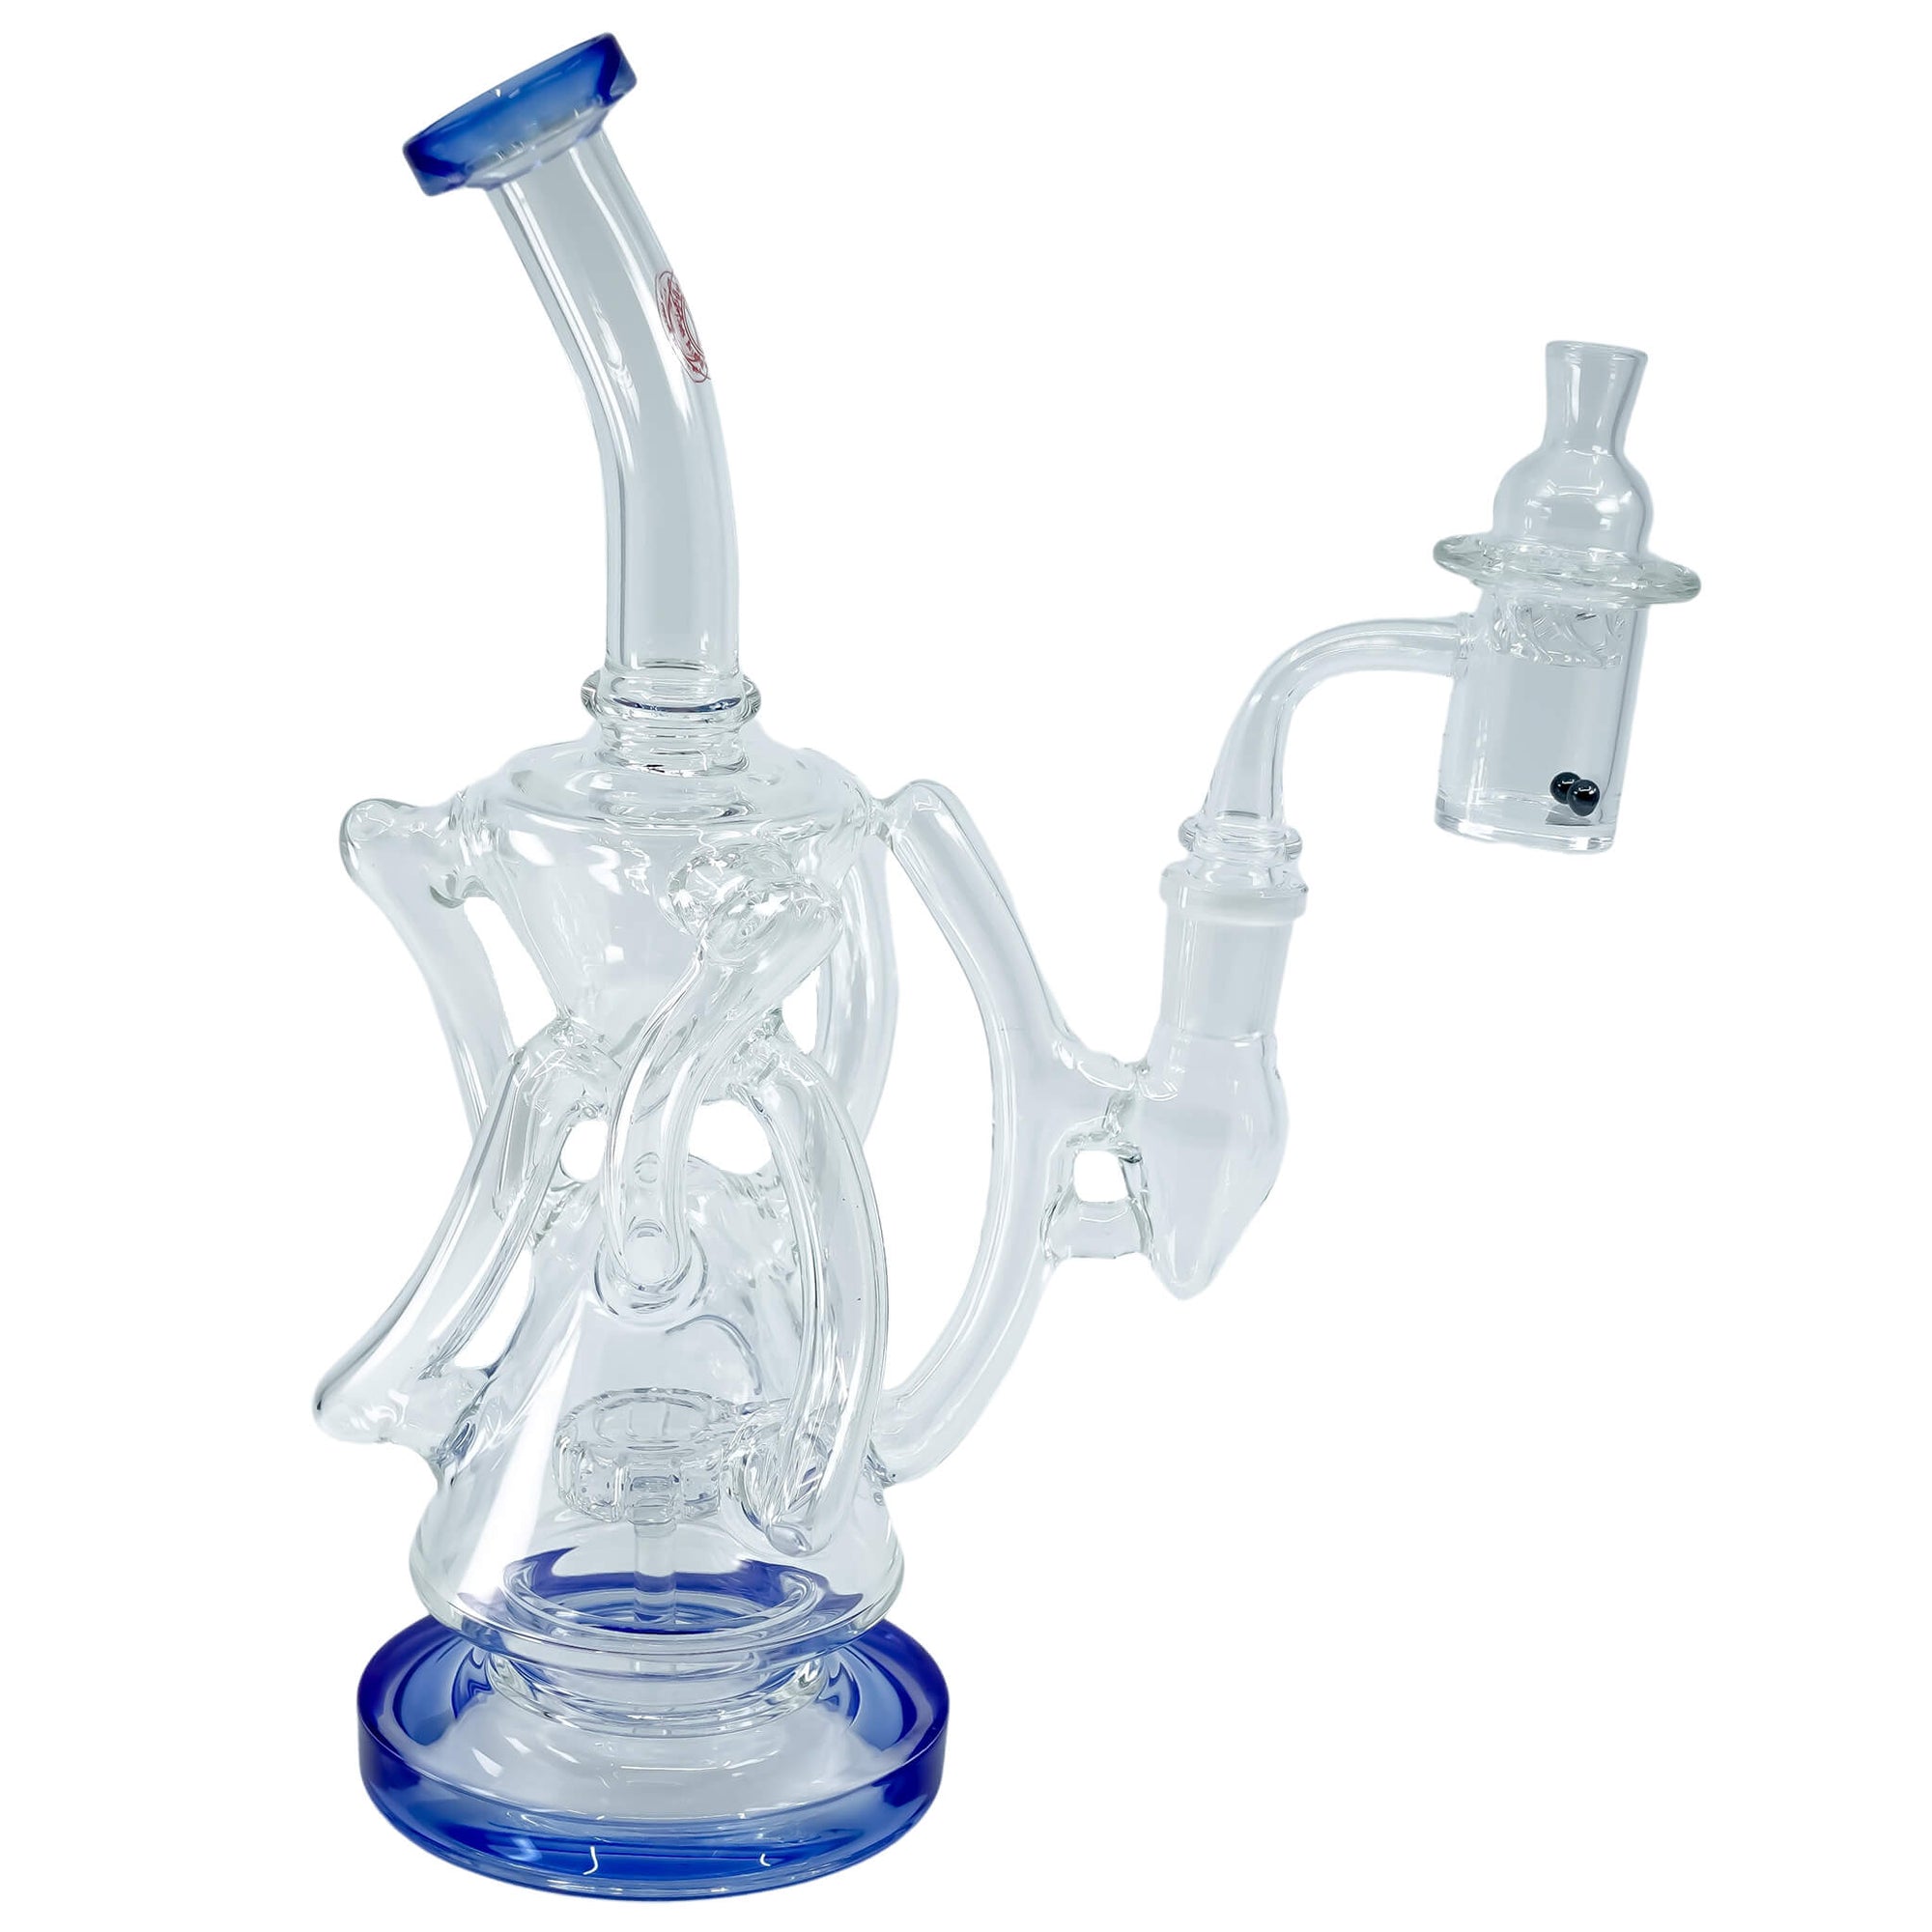 Trifecta 25mm Handmade Joint Complete Dabbing Kit #1 | Blue With SiC View | TDS